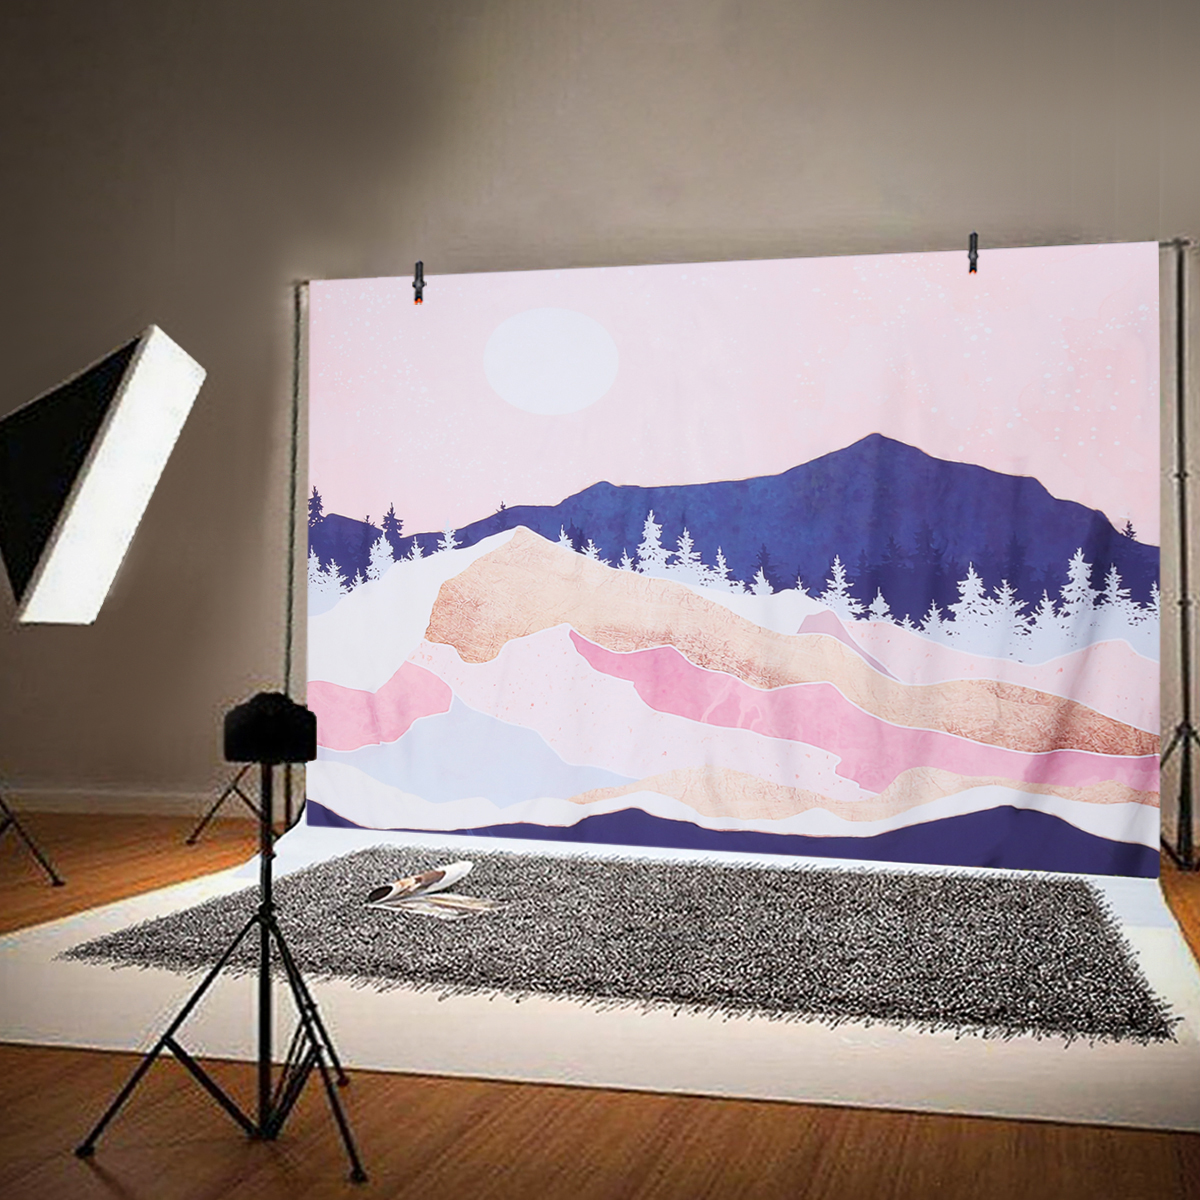 150130CM-Reusable-Photography-Backdrop-Fabric-Mat-Cloth-for-Studio-Photo-Background-Screen-Pad-1838149-10